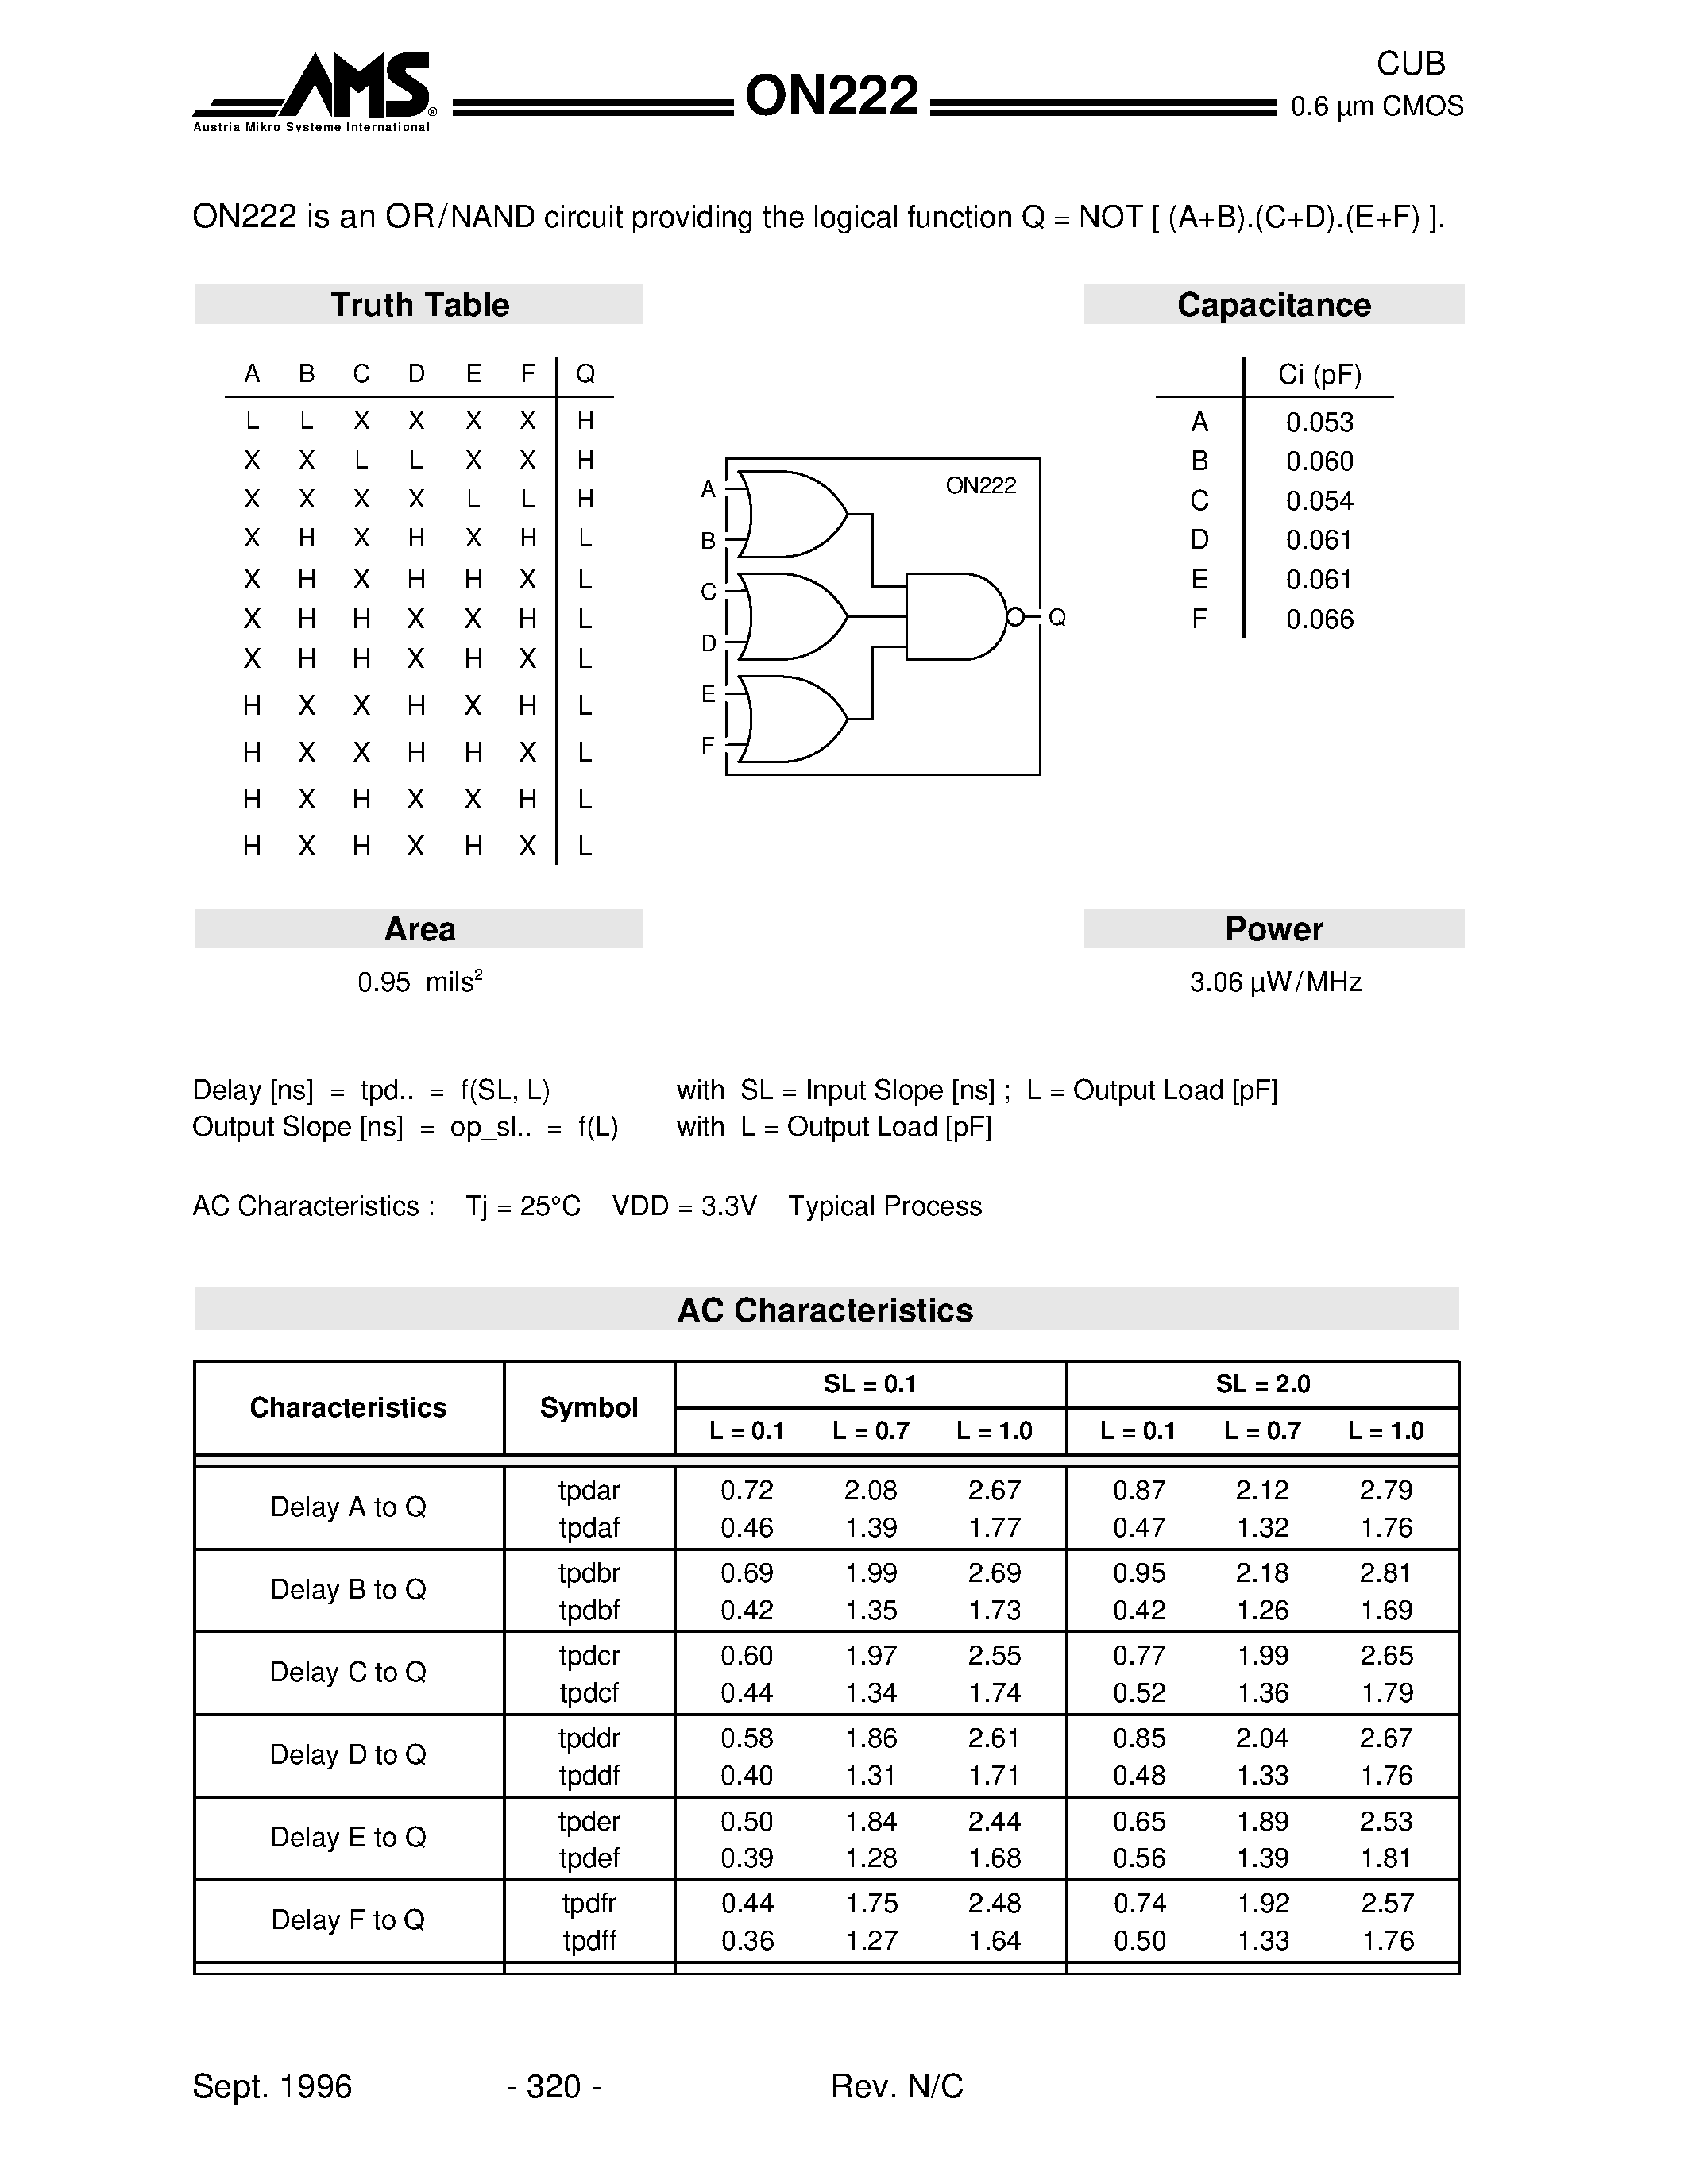 Datasheet ON222 - ON222 is an OR / NAND circuit providing the logical function Q = NOT (A+B).(C+D).(E+F) page 1